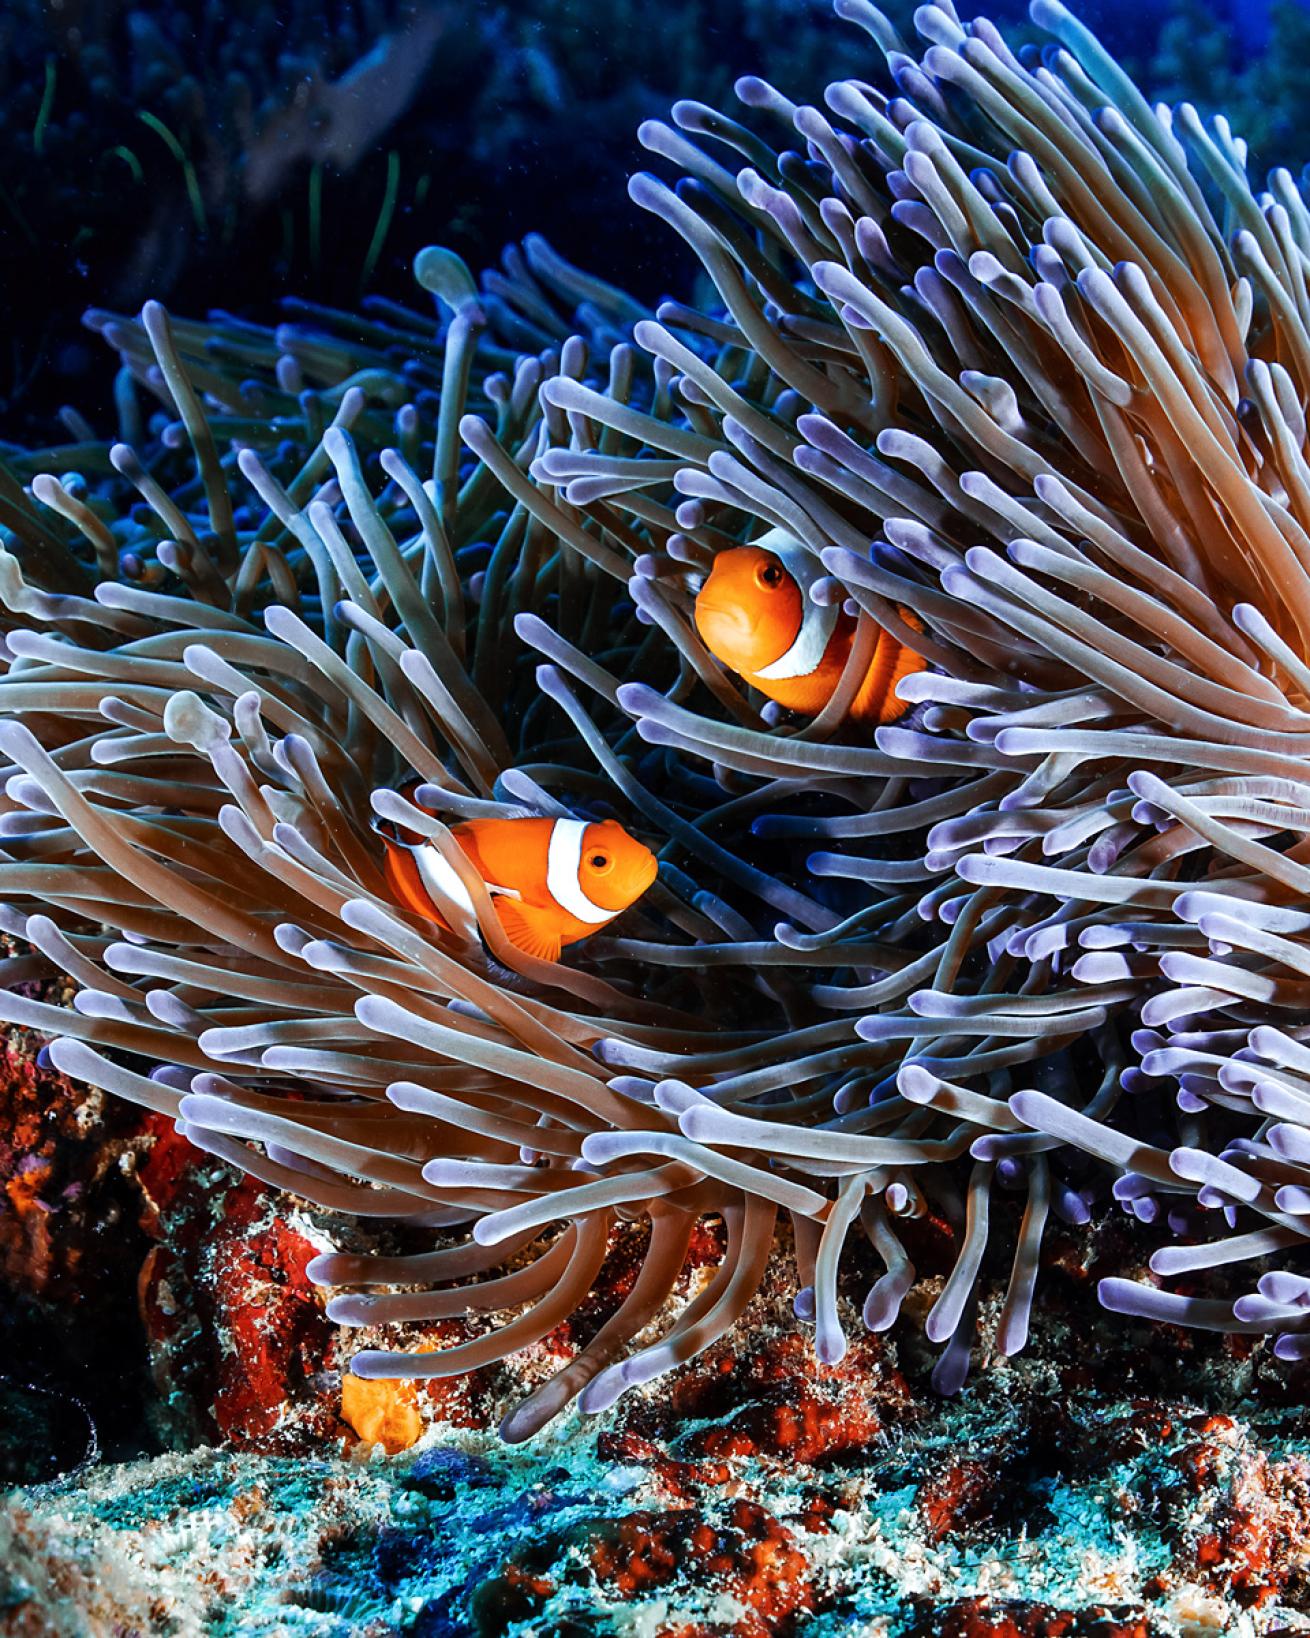 clown fish in anemone